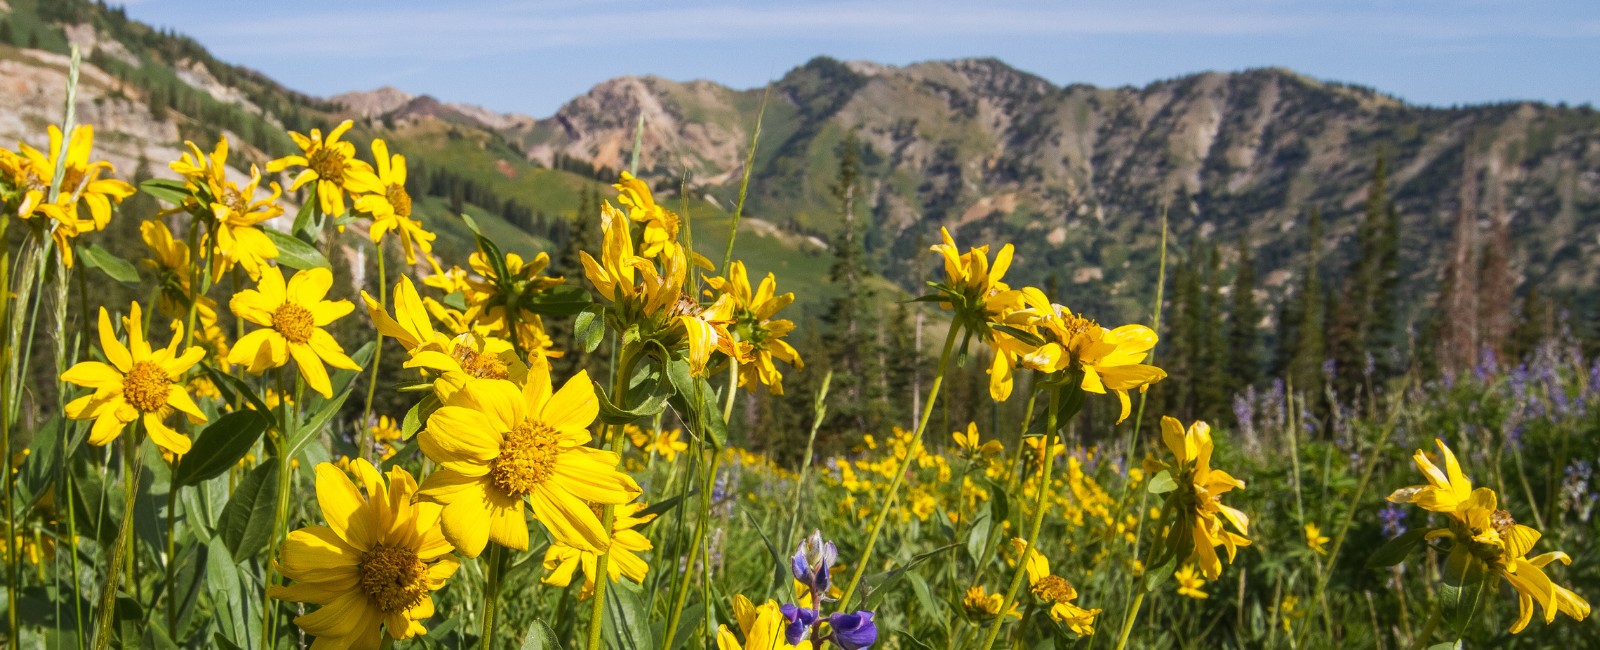 Stay Wild: The 10 Most Common Wildflowers in the Wasatch